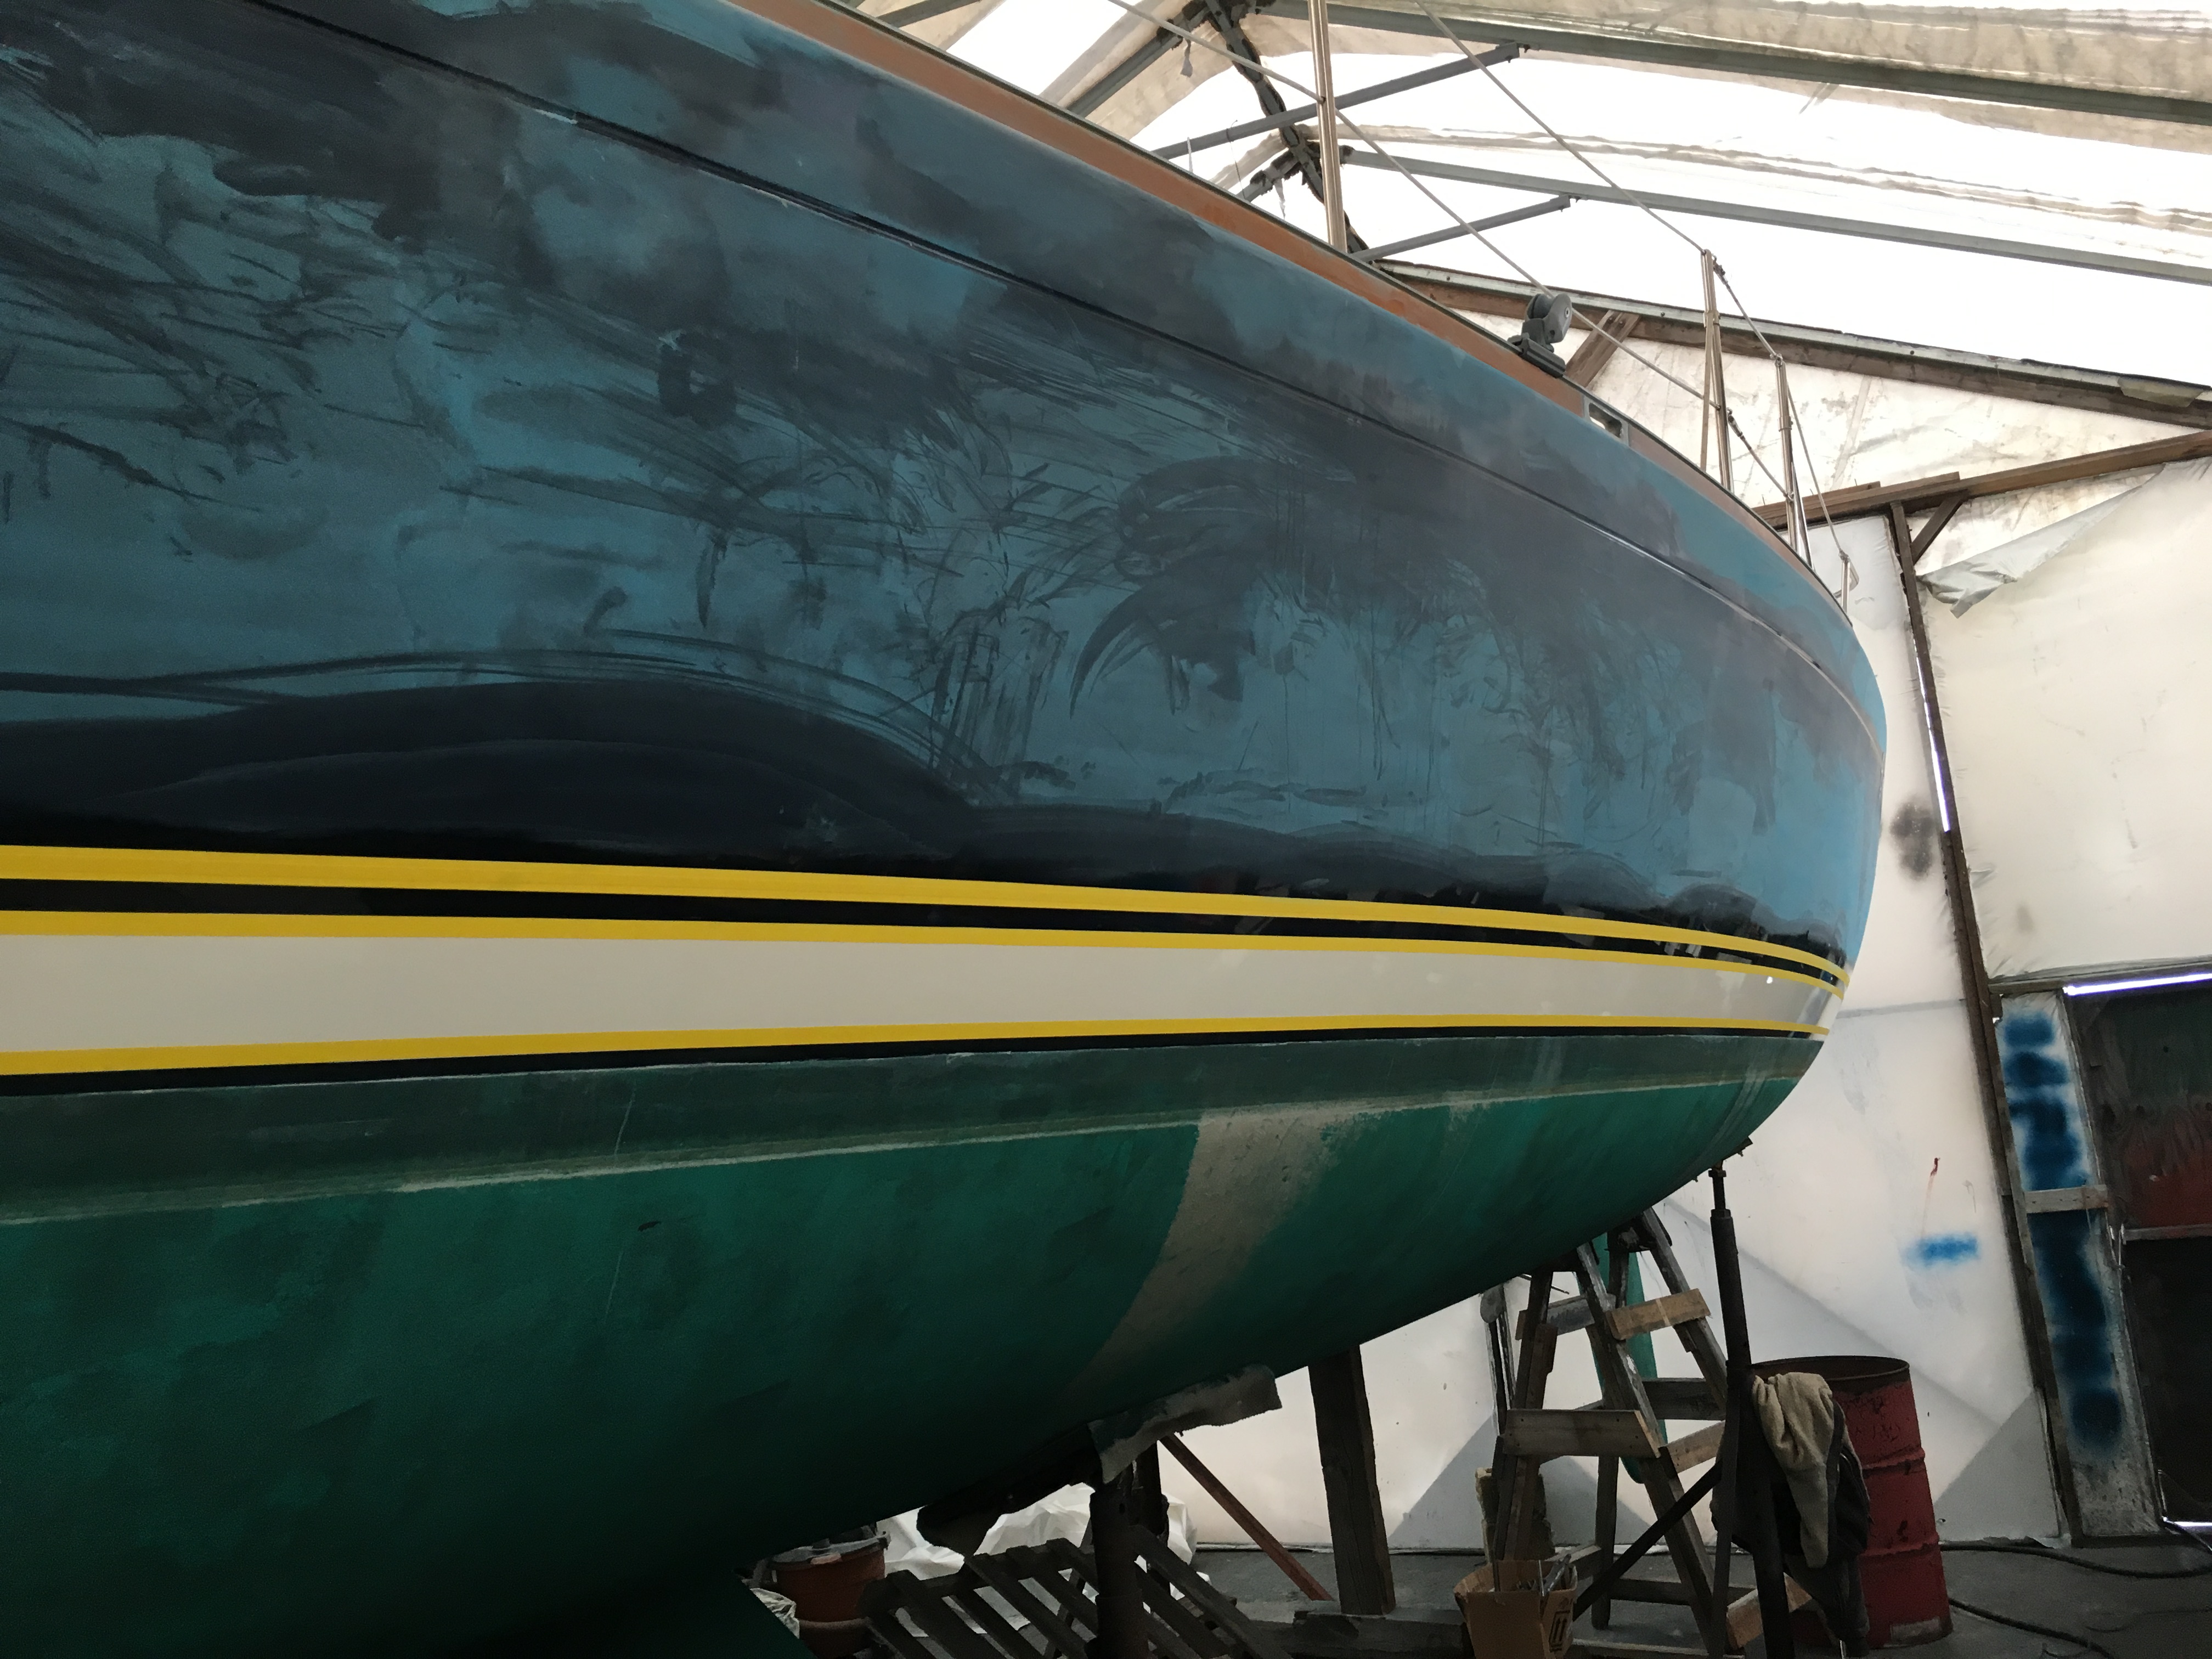 Prepping a Sabre 386 for an Awlgrip Paint Job - January 2017